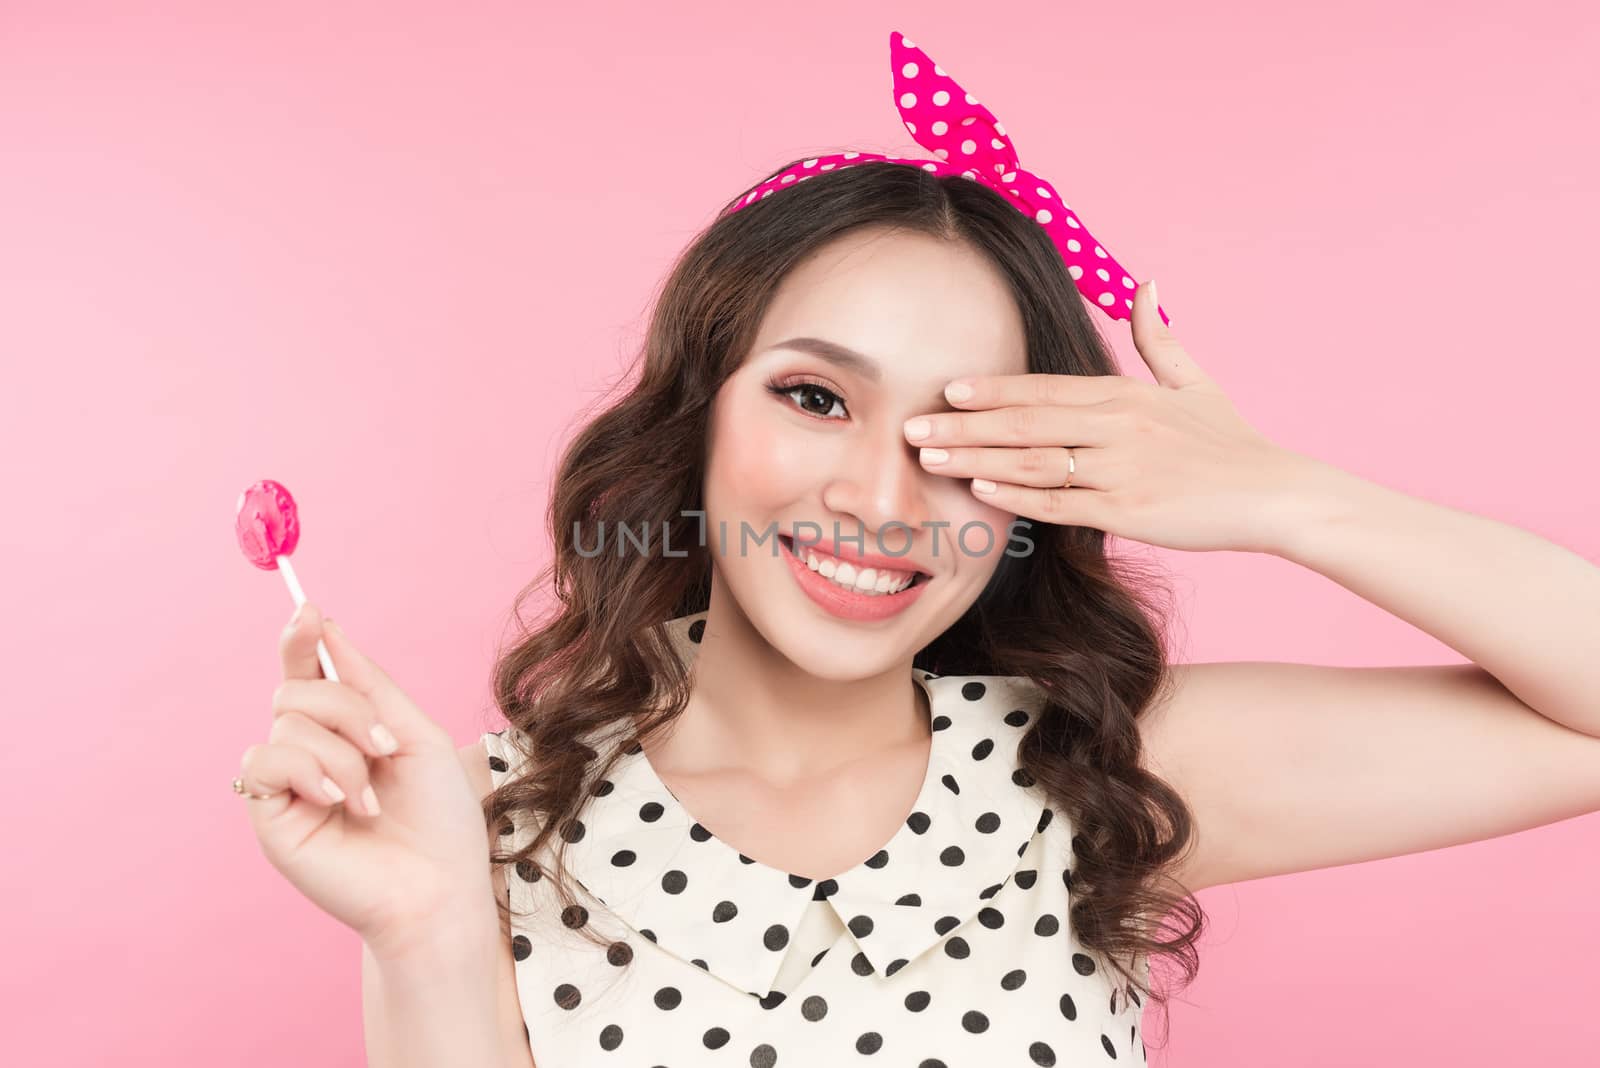 Smiling cute girl with lollipop, covering her eye by hand over pink background